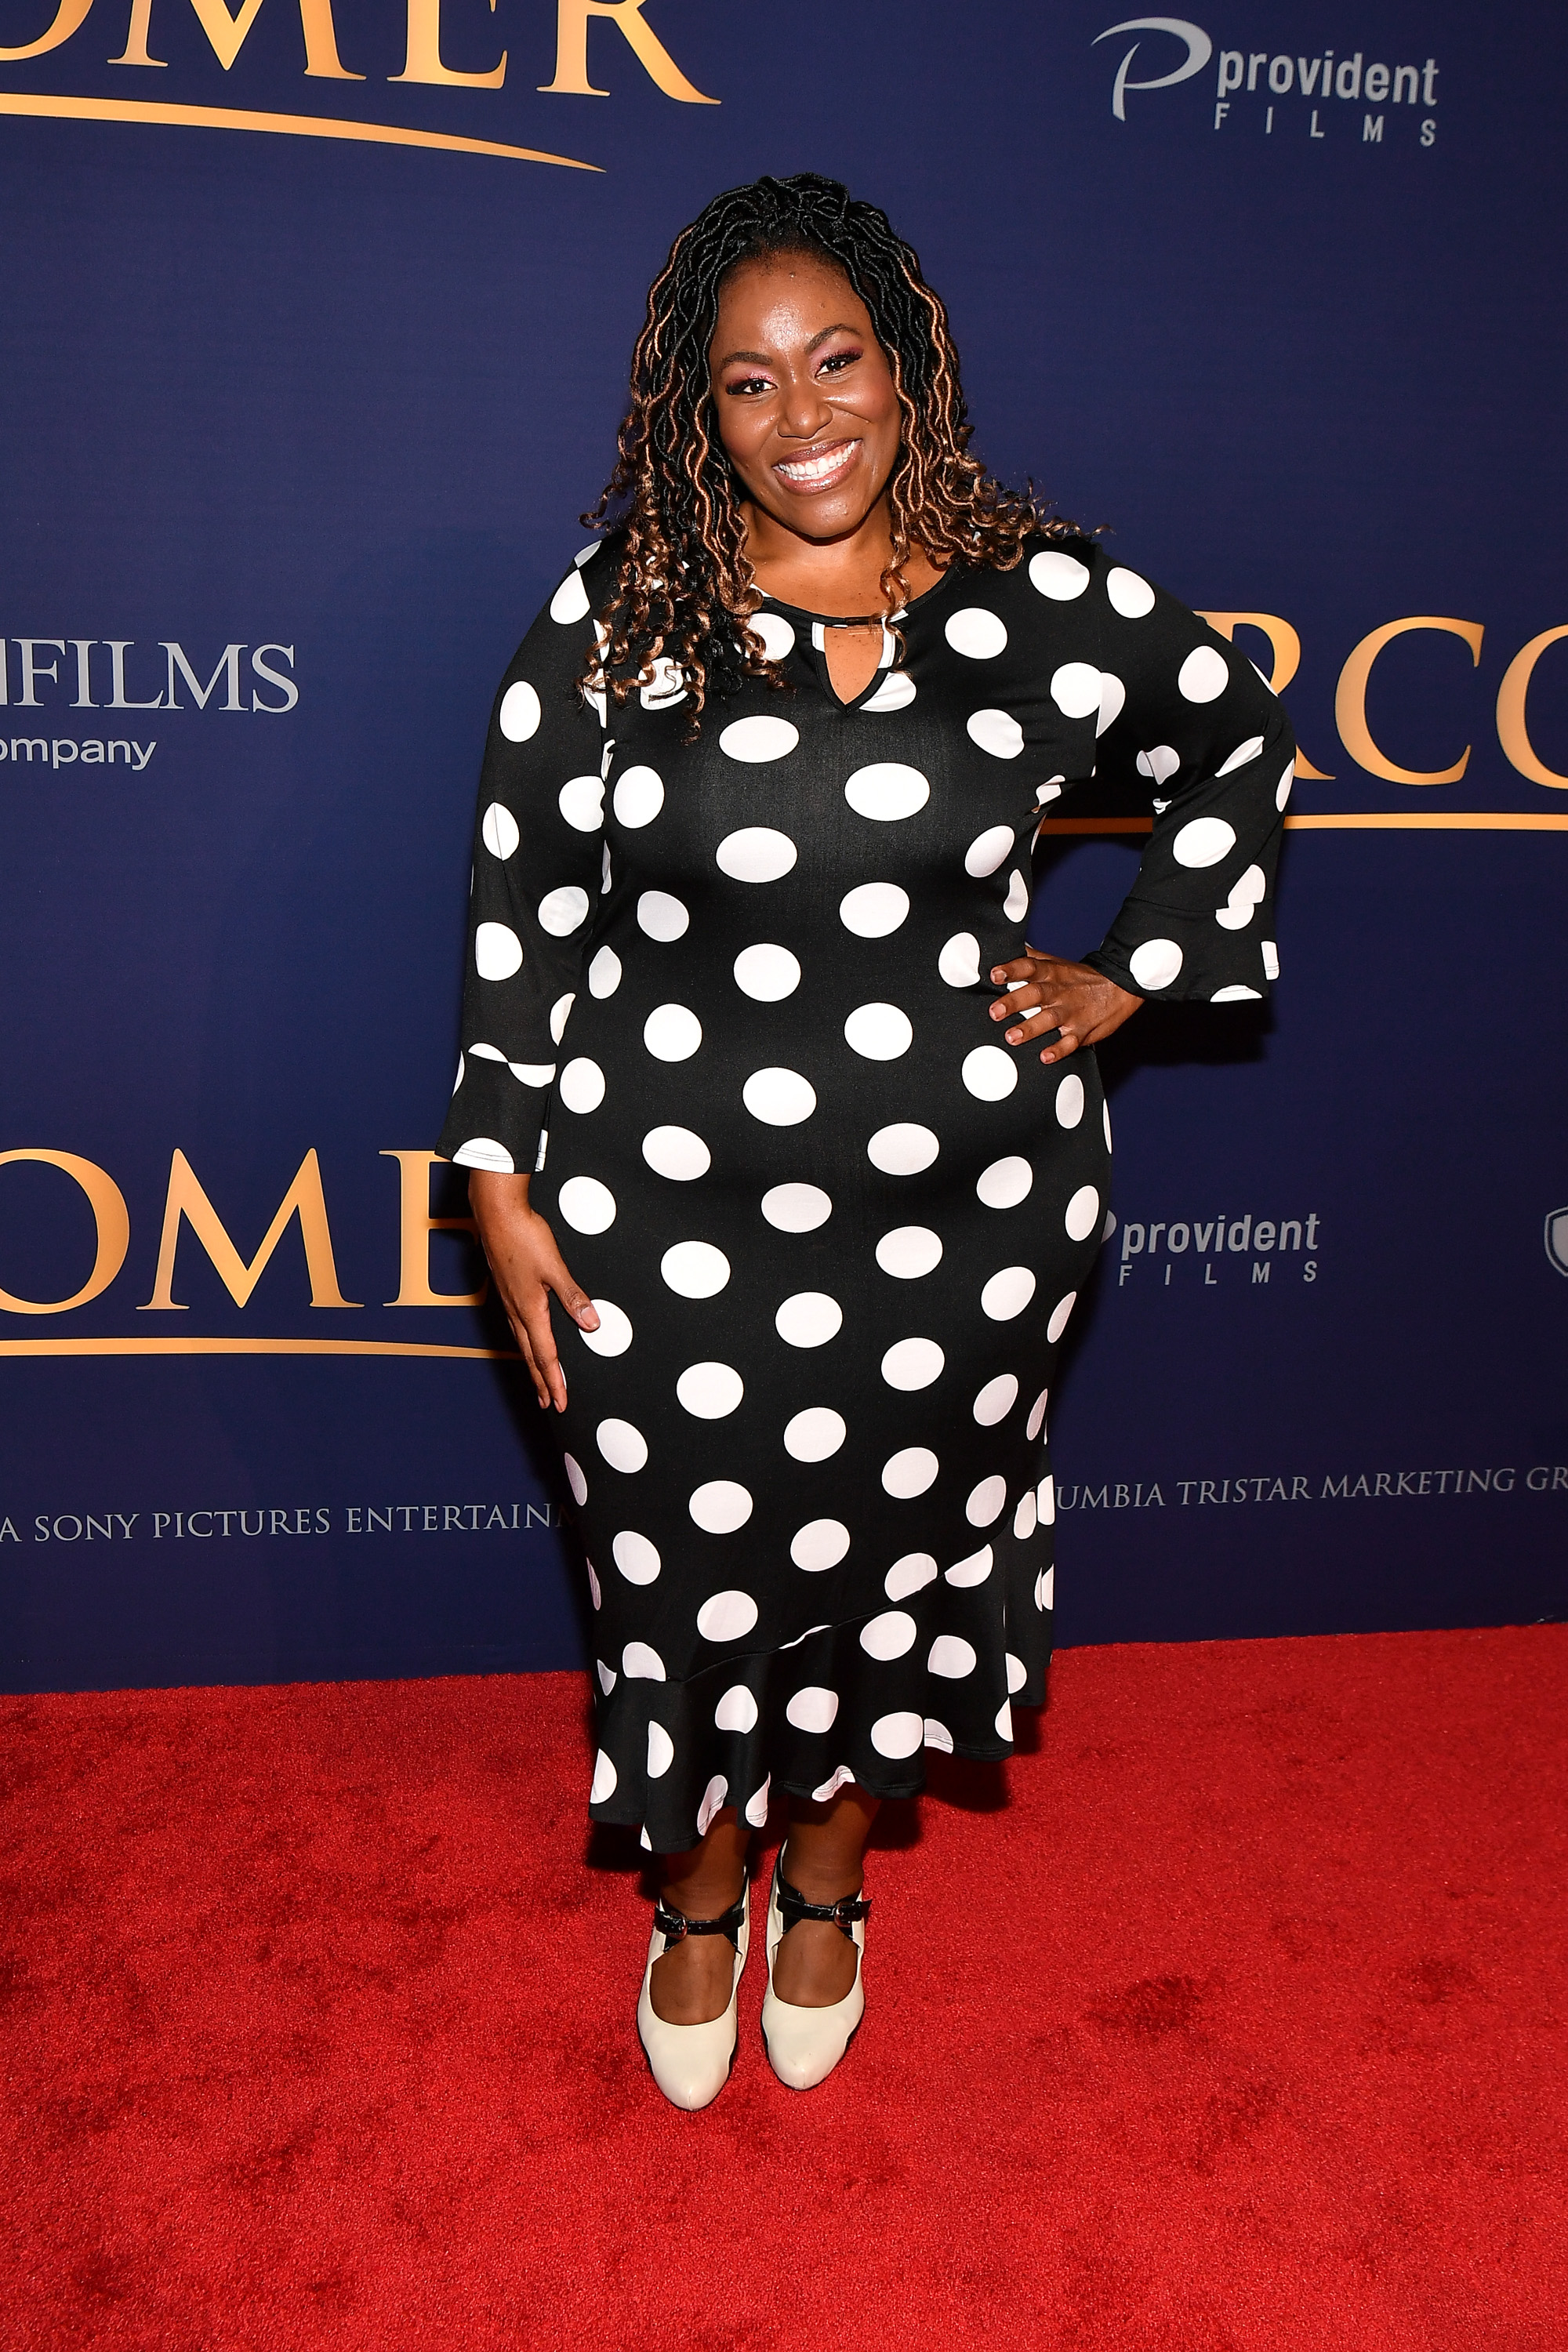 Mandisa at an event in Atlanta, Georgia on August 15, 2019 | Source: Getty Images